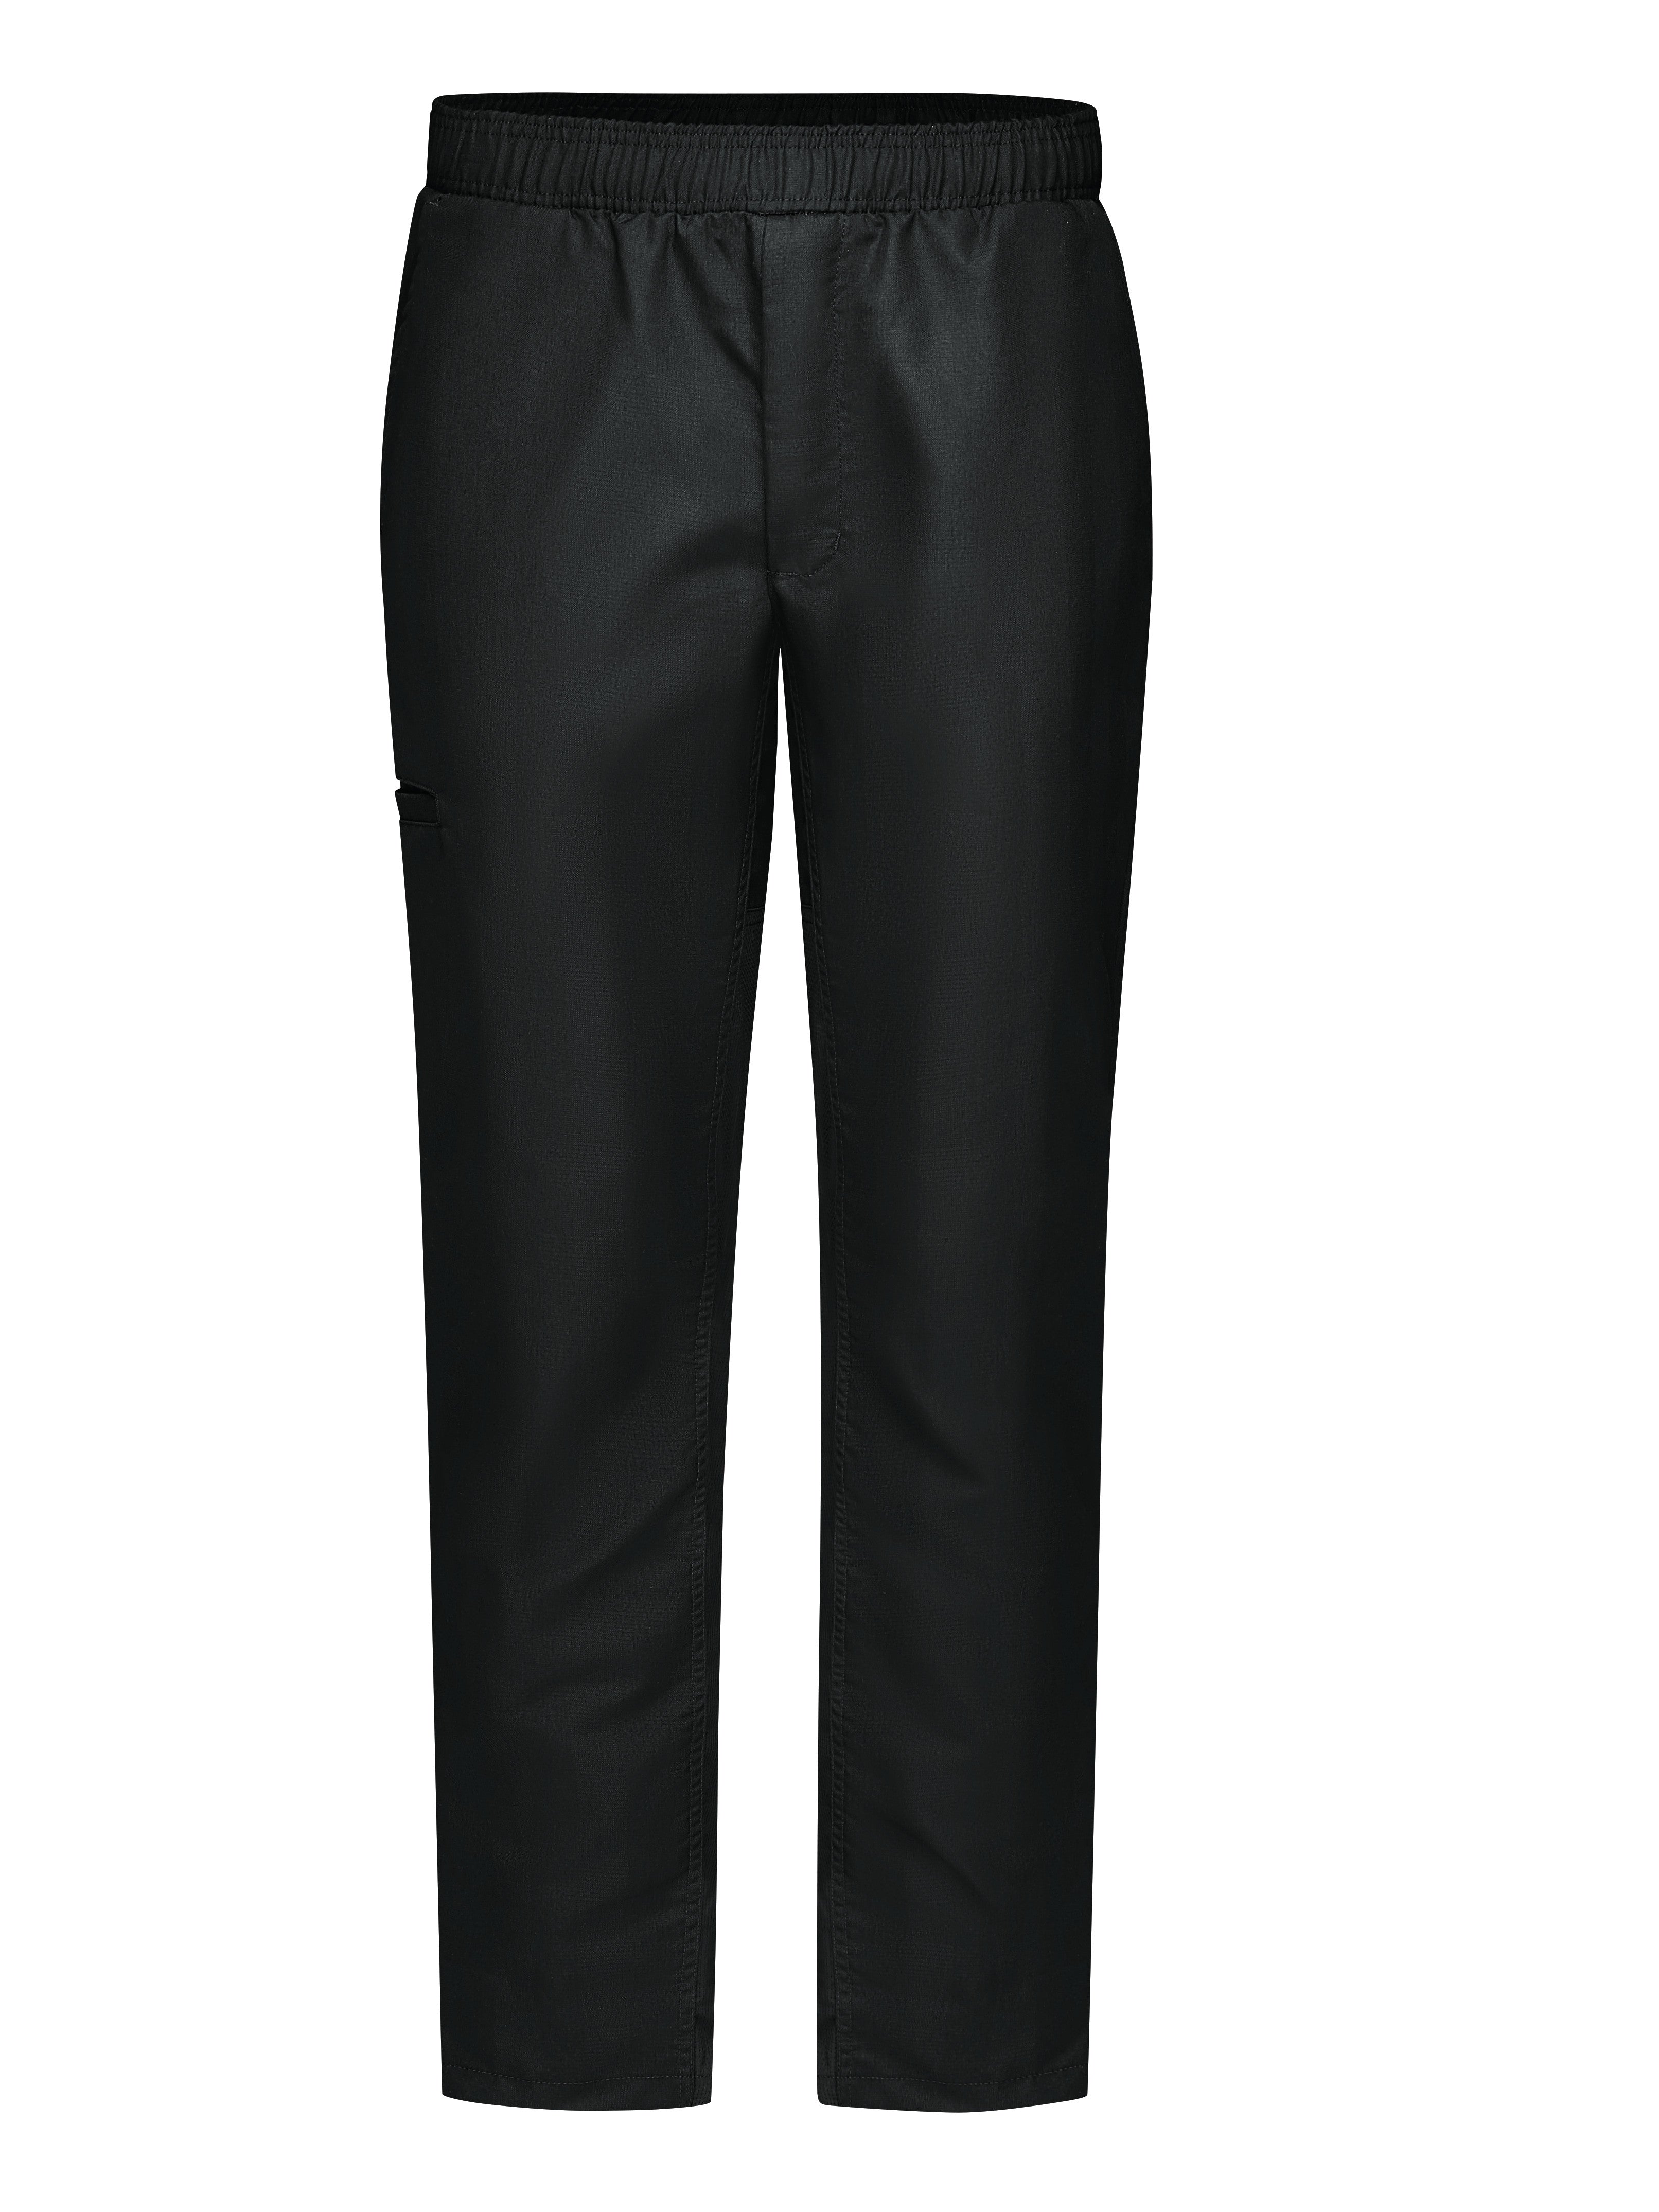 Red Kap Men's Straight Fit Airflow Chef Pant